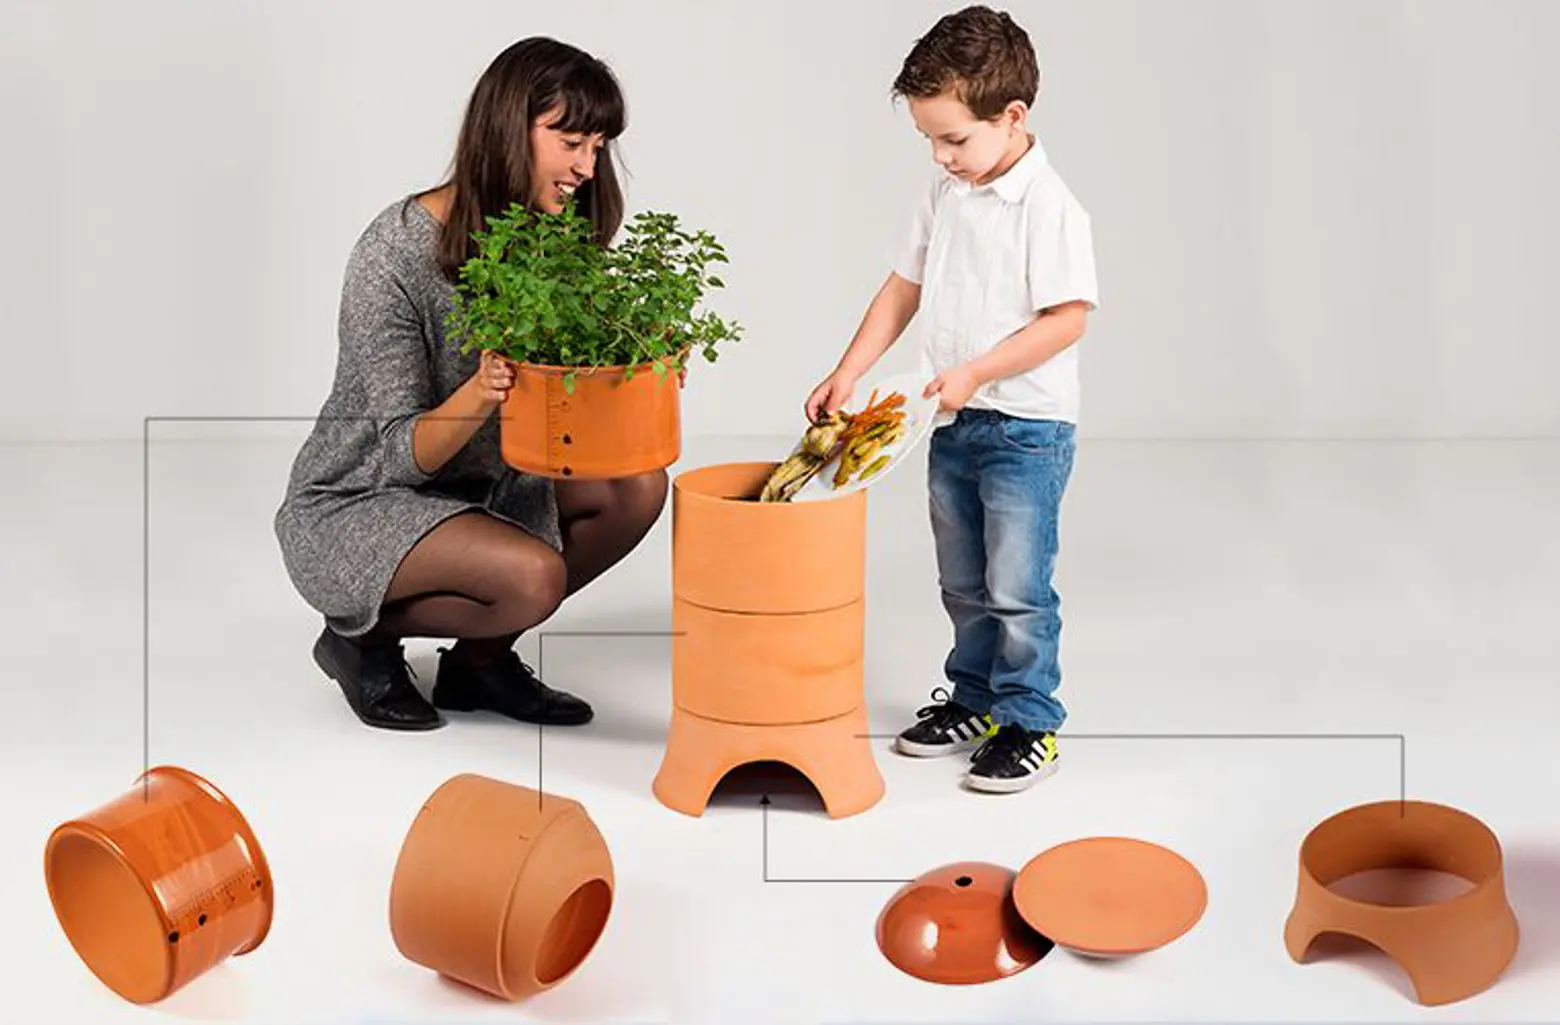 Uroboro Is a Simple Yet Stylish Home Composter That Feeds Your Plants Using Worms